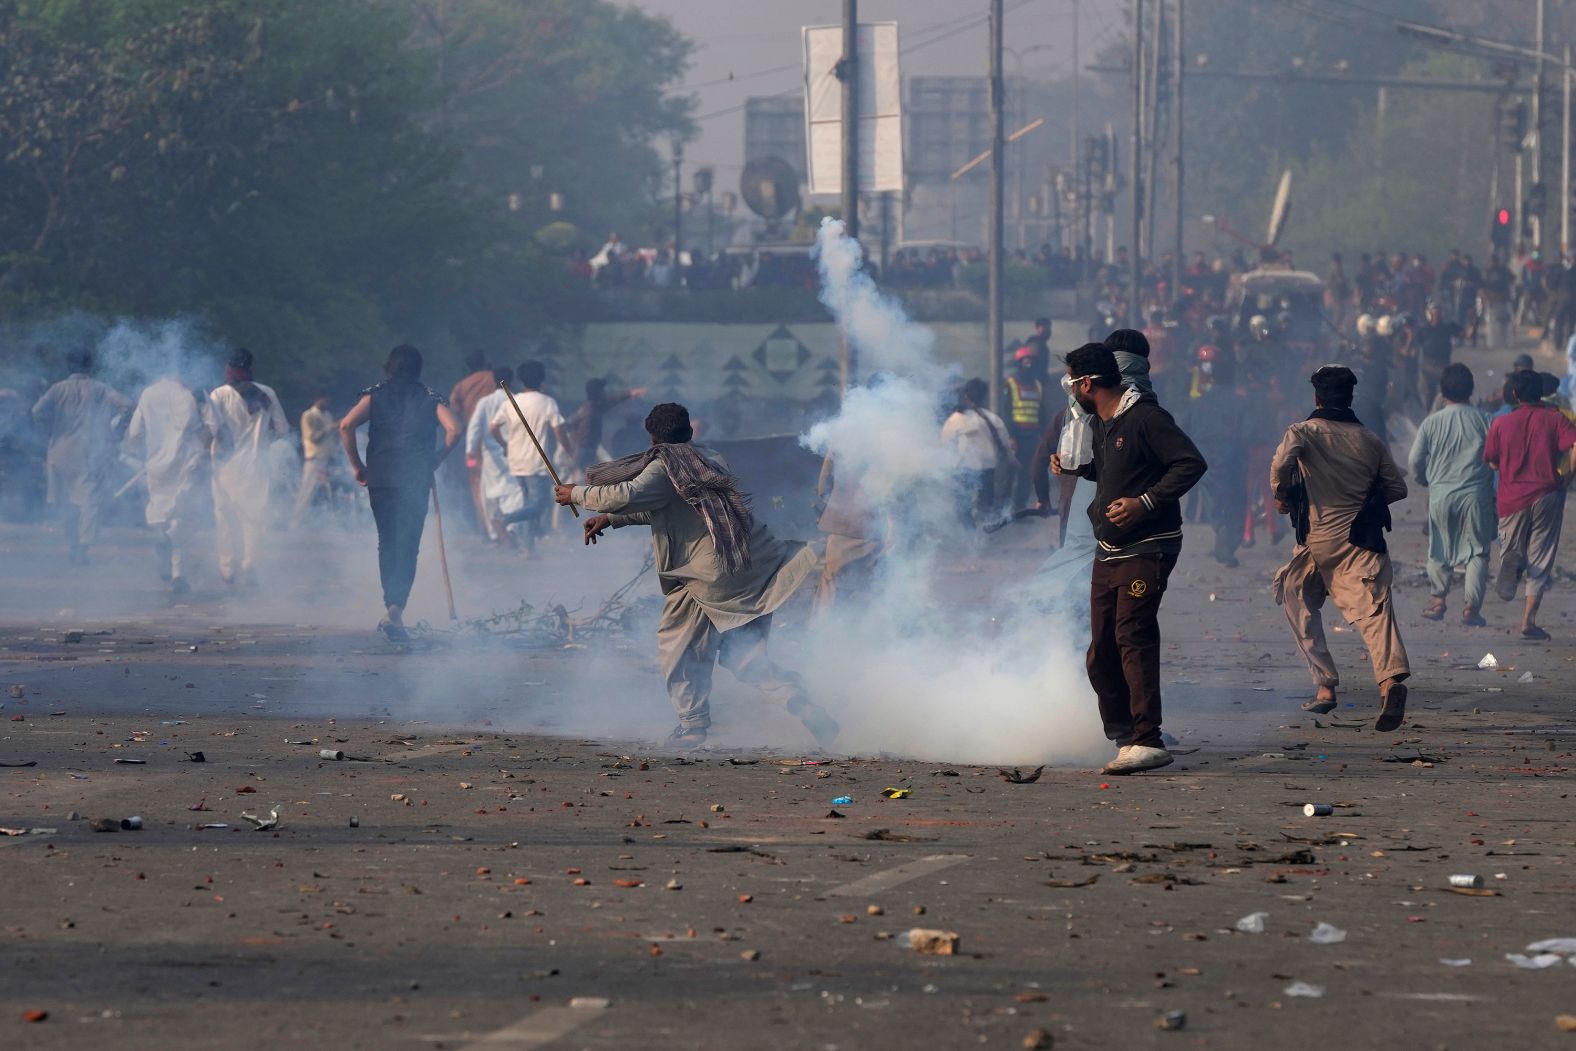 Supporters of former Pakistani Prime Minister Imran Khan throw stones toward riot police officers firing tear gas to disperse them in Lahore, Pakistan, on Wednesday, March 15. <a href="index.php?page=&url=https%3A%2F%2Fwww.cnn.com%2F2023%2F03%2F14%2Fasia%2Fpakistan-imran-khan-clashes-police-intl%2Findex.html" target="_blank">Clashes between Pakistan's police and supporters of Khan</a> persisted outside his home in the eastern city of Lahore on Wednesday, a day after officers went to arrest him for failing to appear in court on corruption charges. Police were later ordered to suspend the operation.